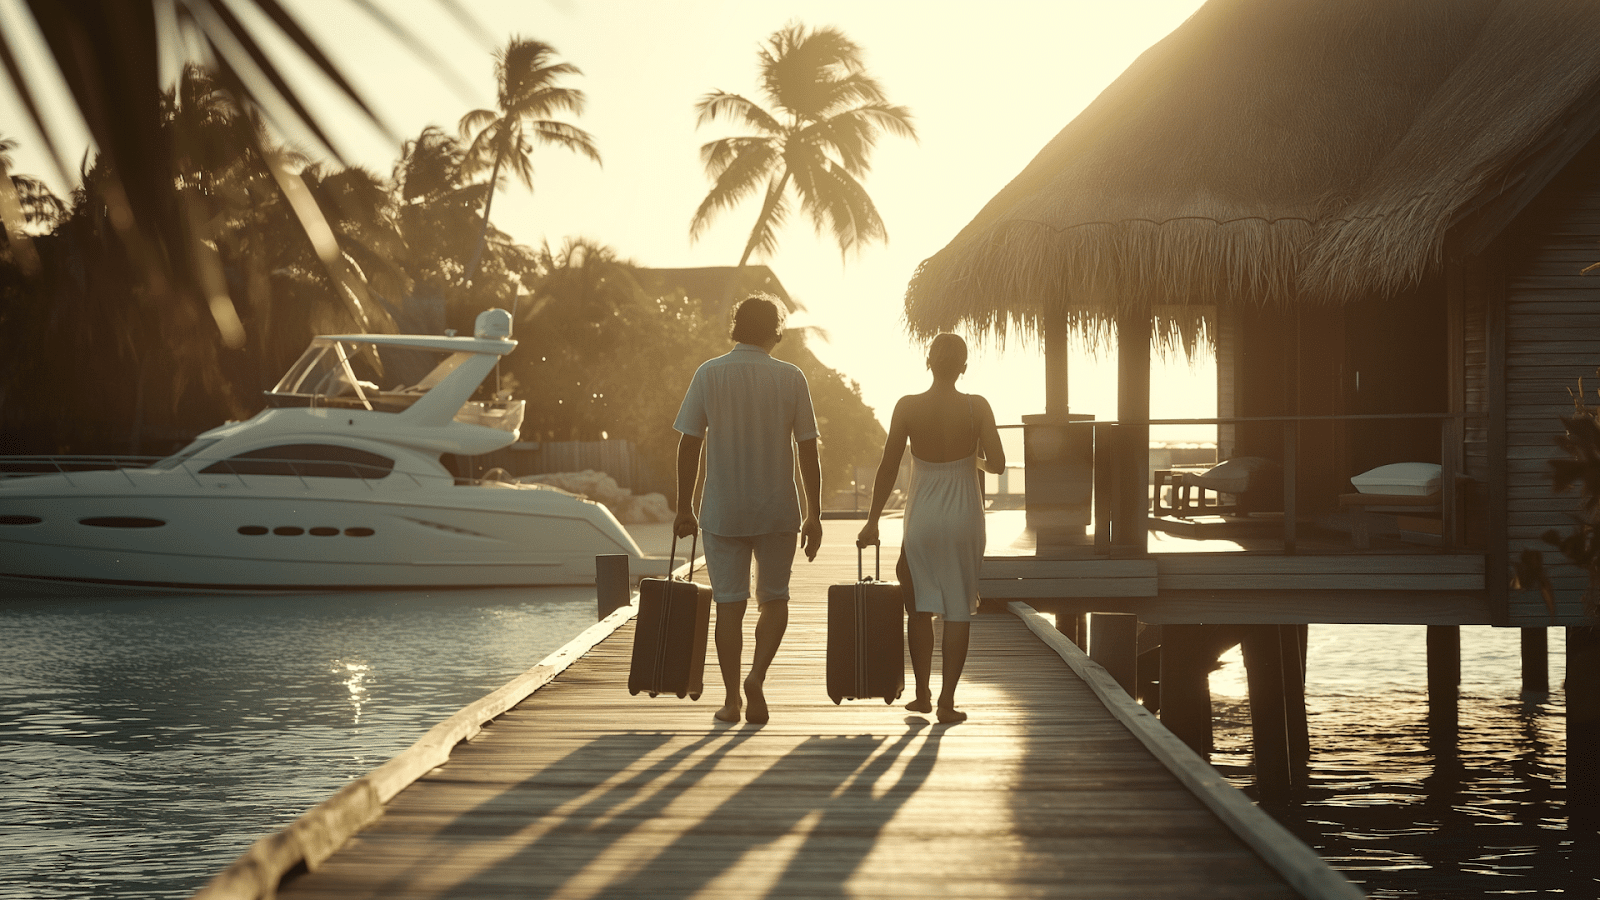 A couple walking to their private overwater bungalow at sunset in the Maldives.